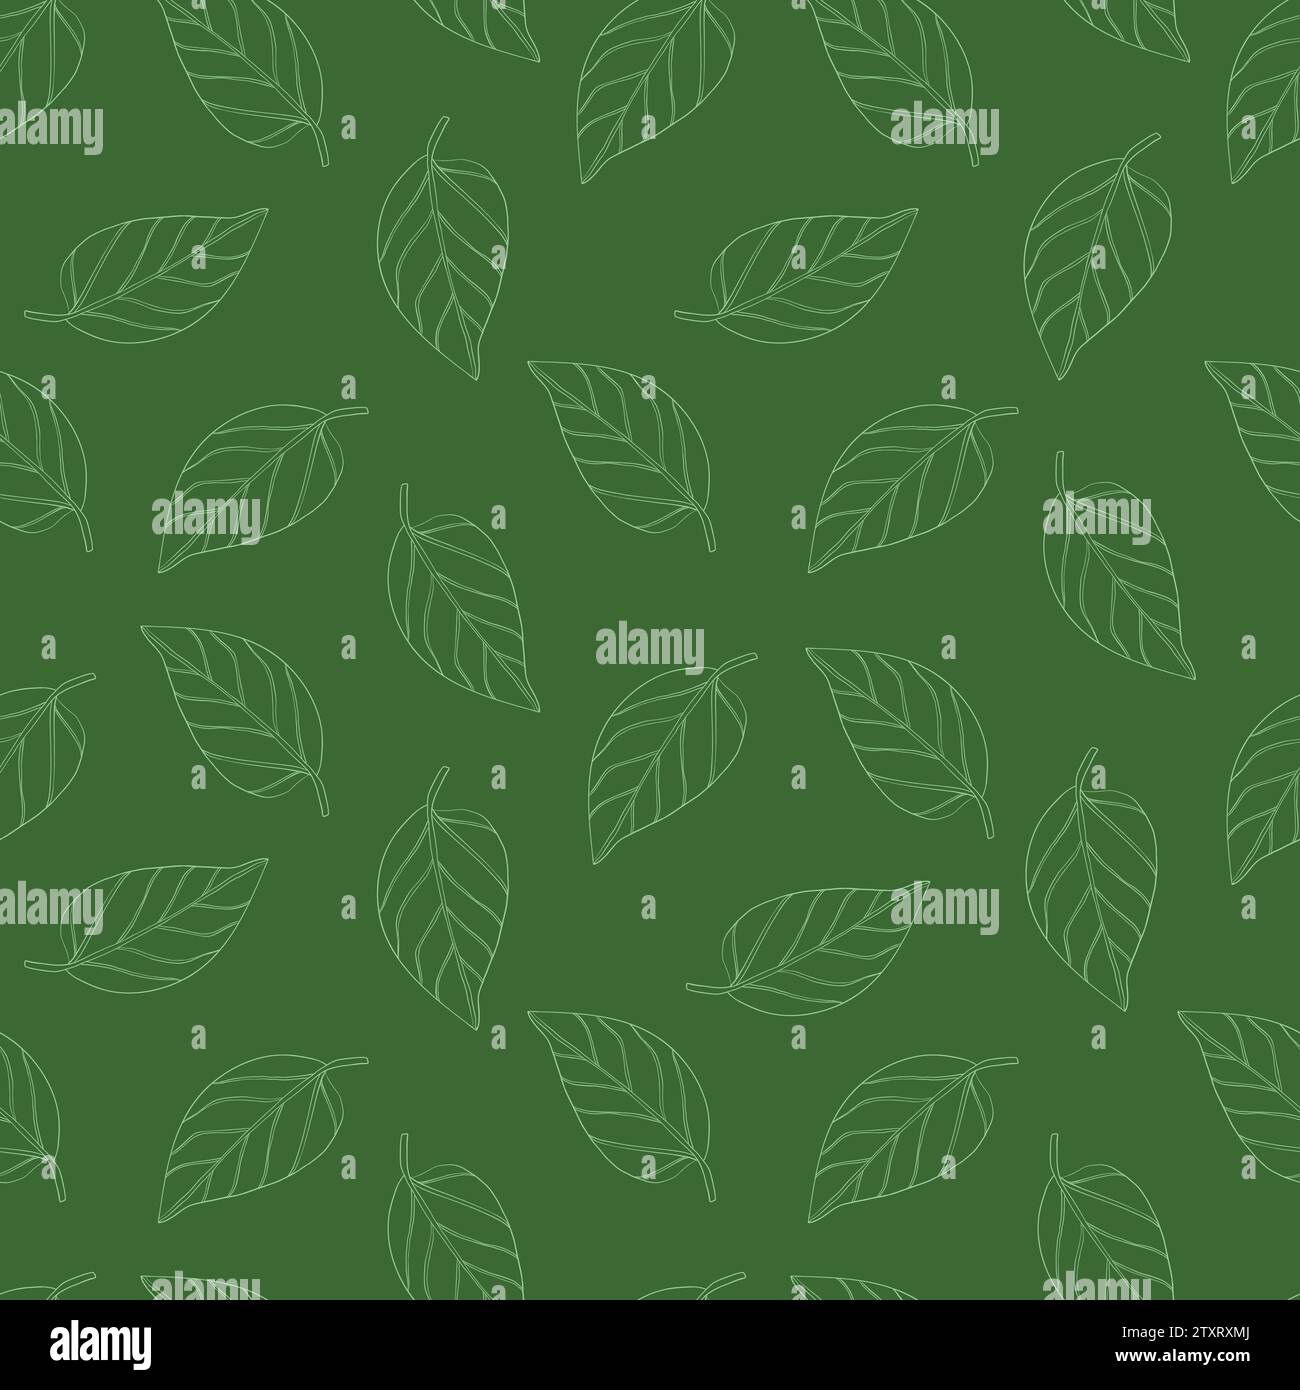 Green line art leaves seamless pattern for textile, fabric, wallpaper or scrapbook paper, hand drawn floral illustration, botanical greenery vector ba Stock Vector